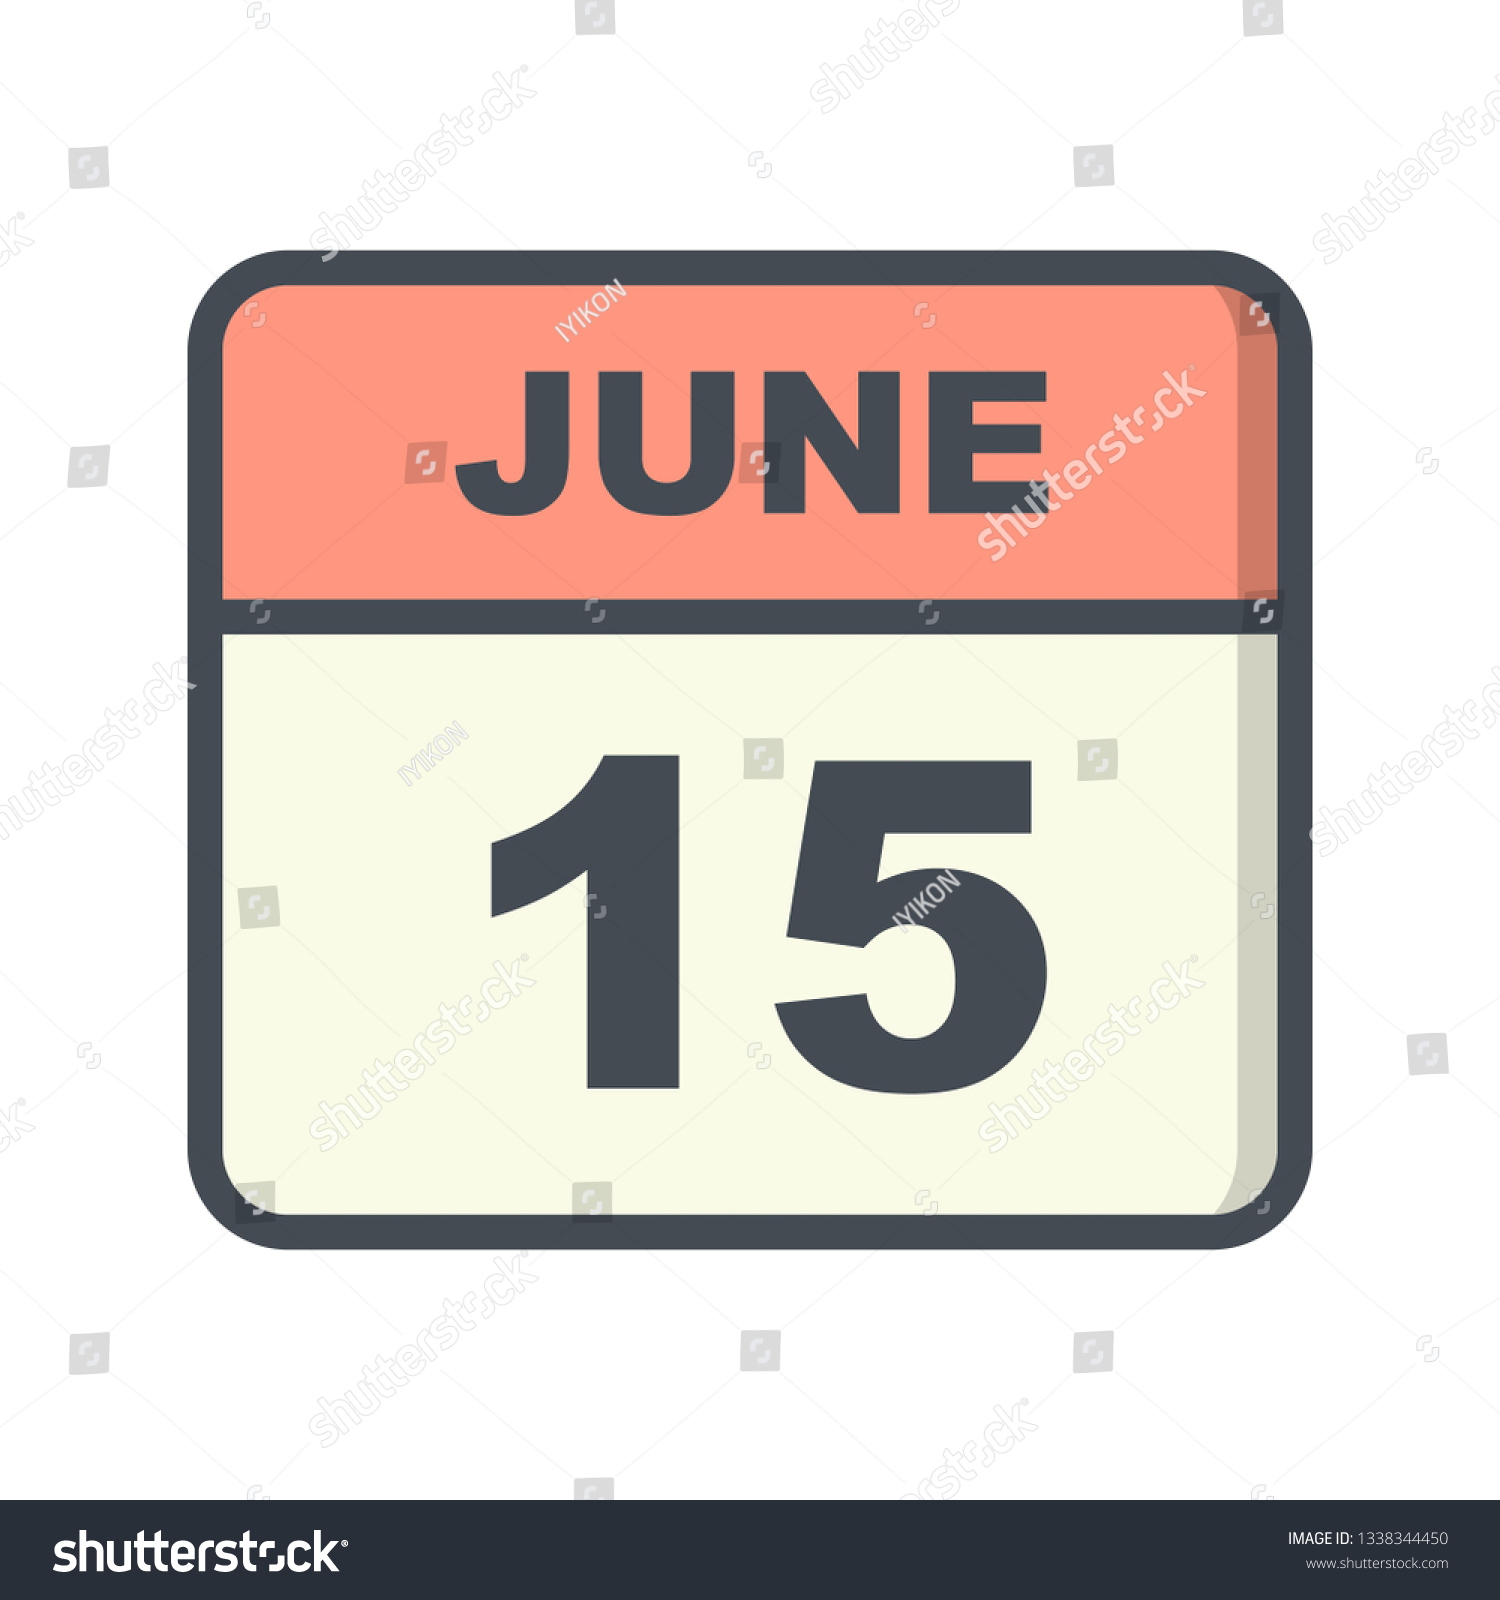 June 15th Date on a Single Day Calendar Royalty Free Stock Vector